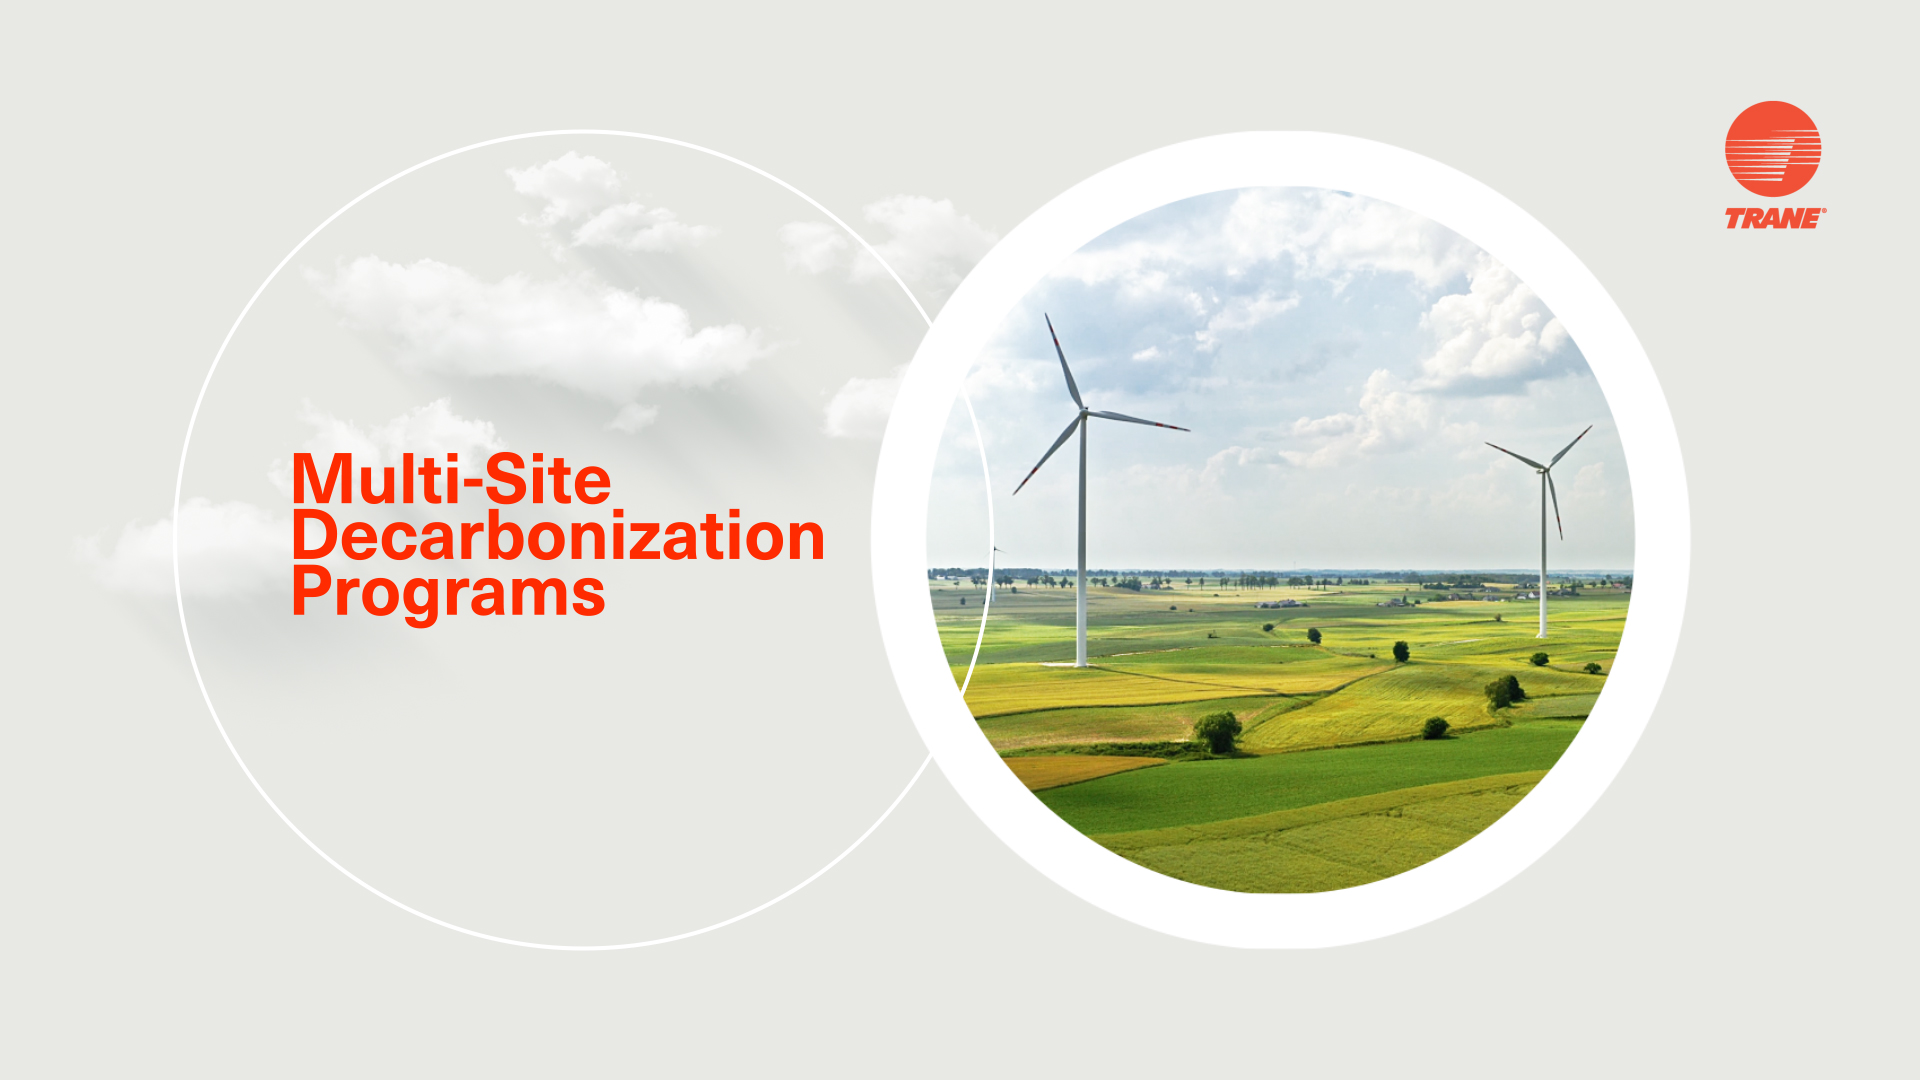 A Centralized Approach to Multi-Site Decarbonization